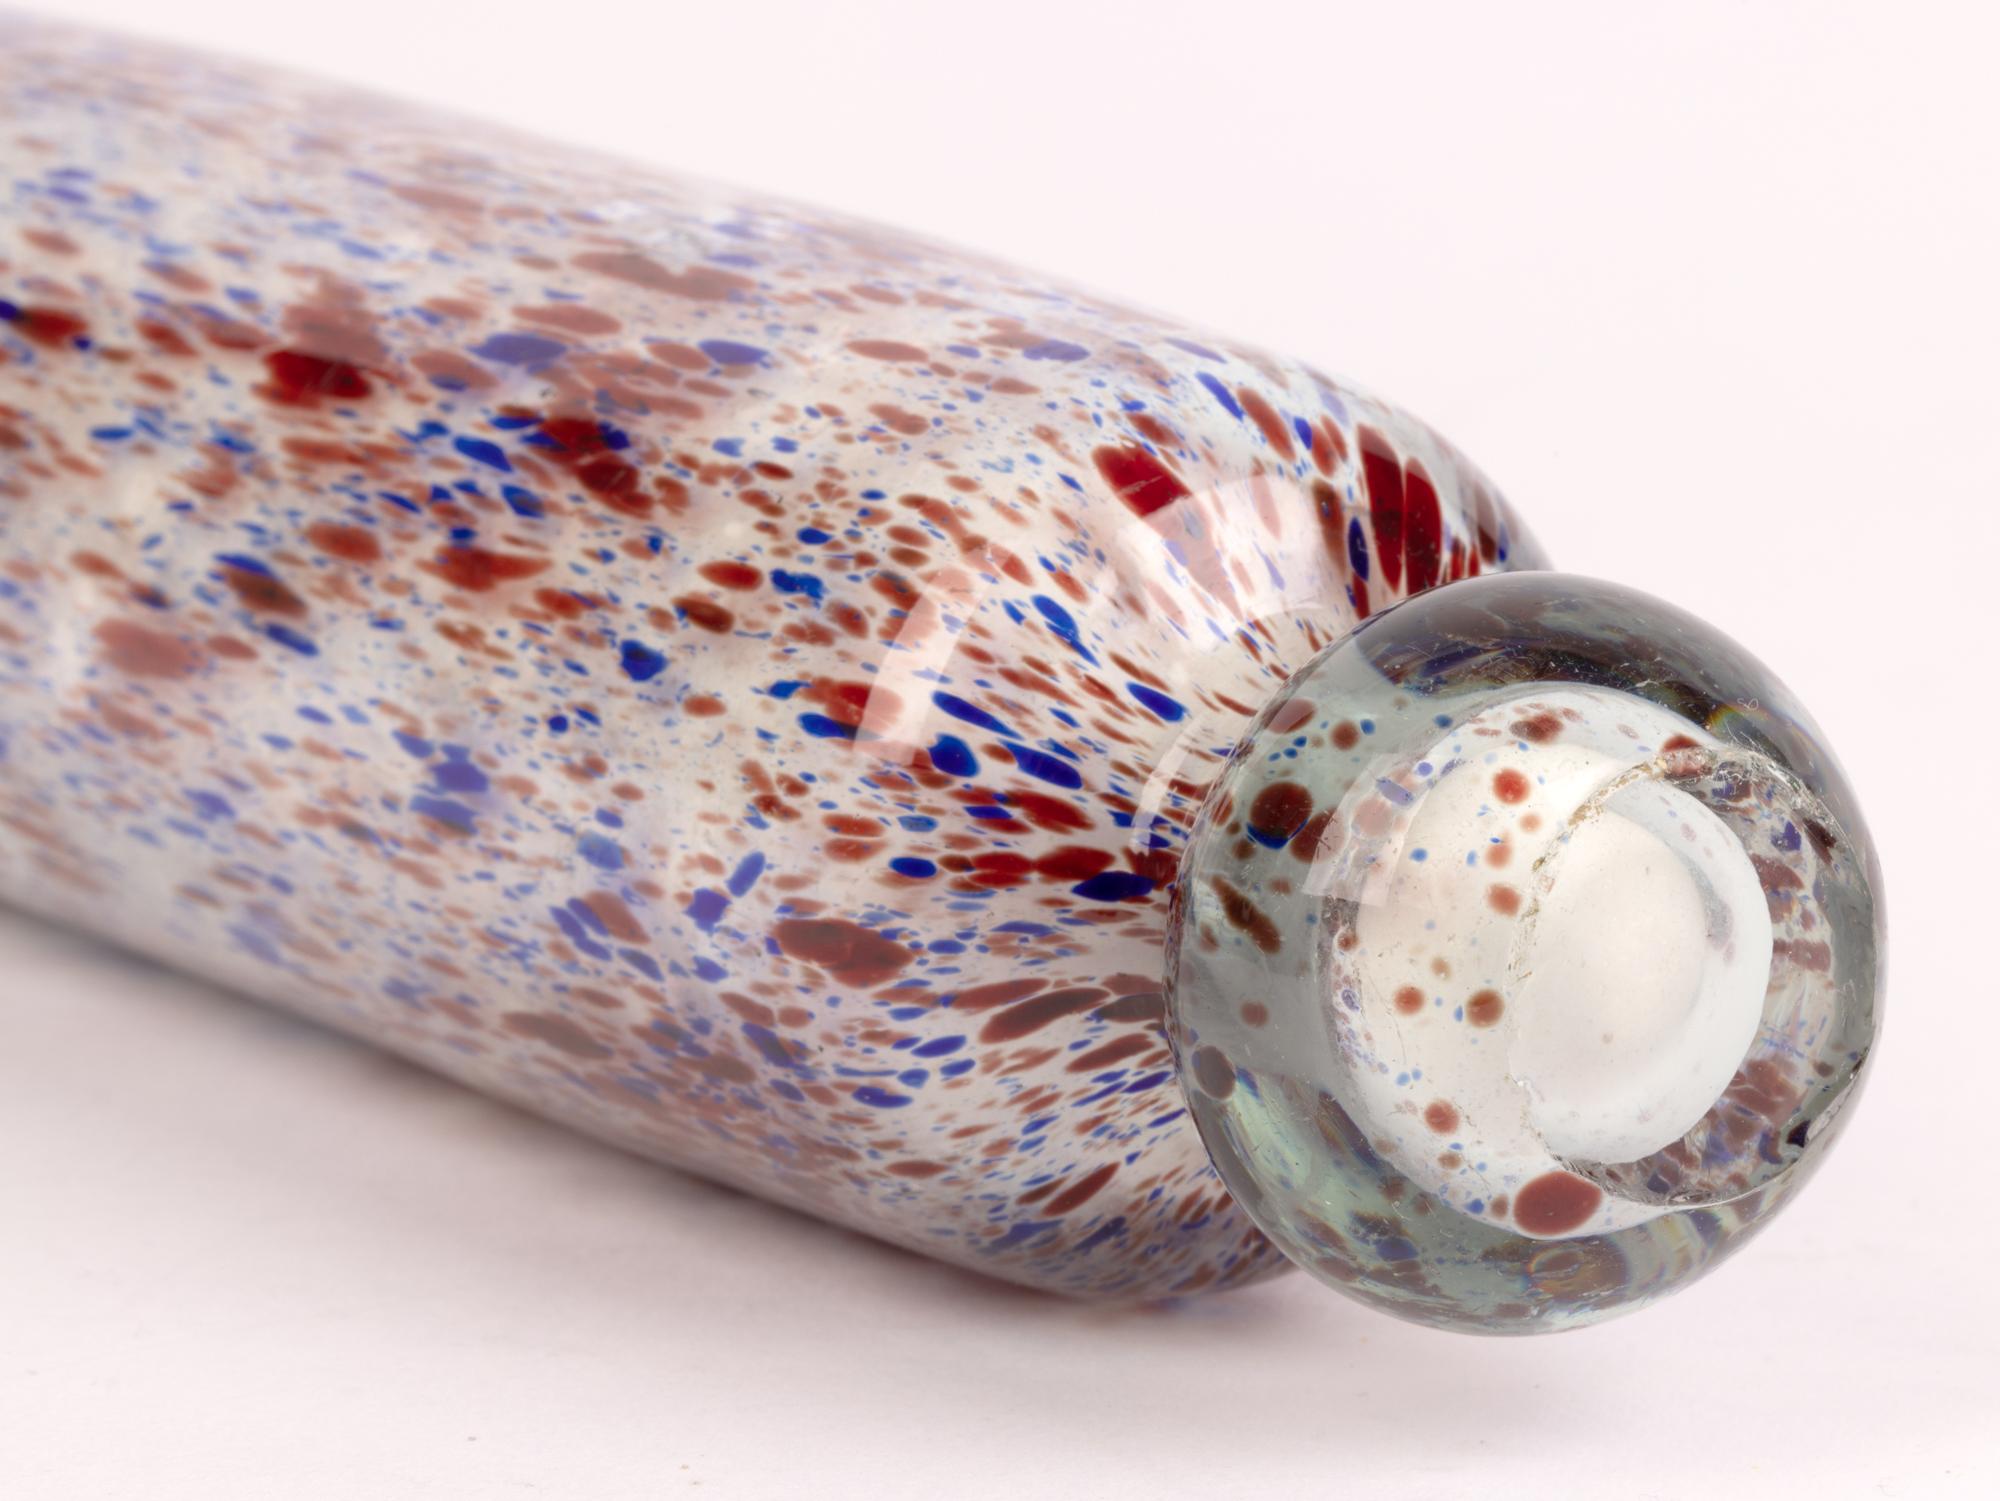 A good Nailsea Victorian glass rolling pin with colored glass inclusions dating from the 19th century. The heavily made and hollow blown glass rolling pin has been made in clear glass with a white glass interior and with a spatter pattern of blue